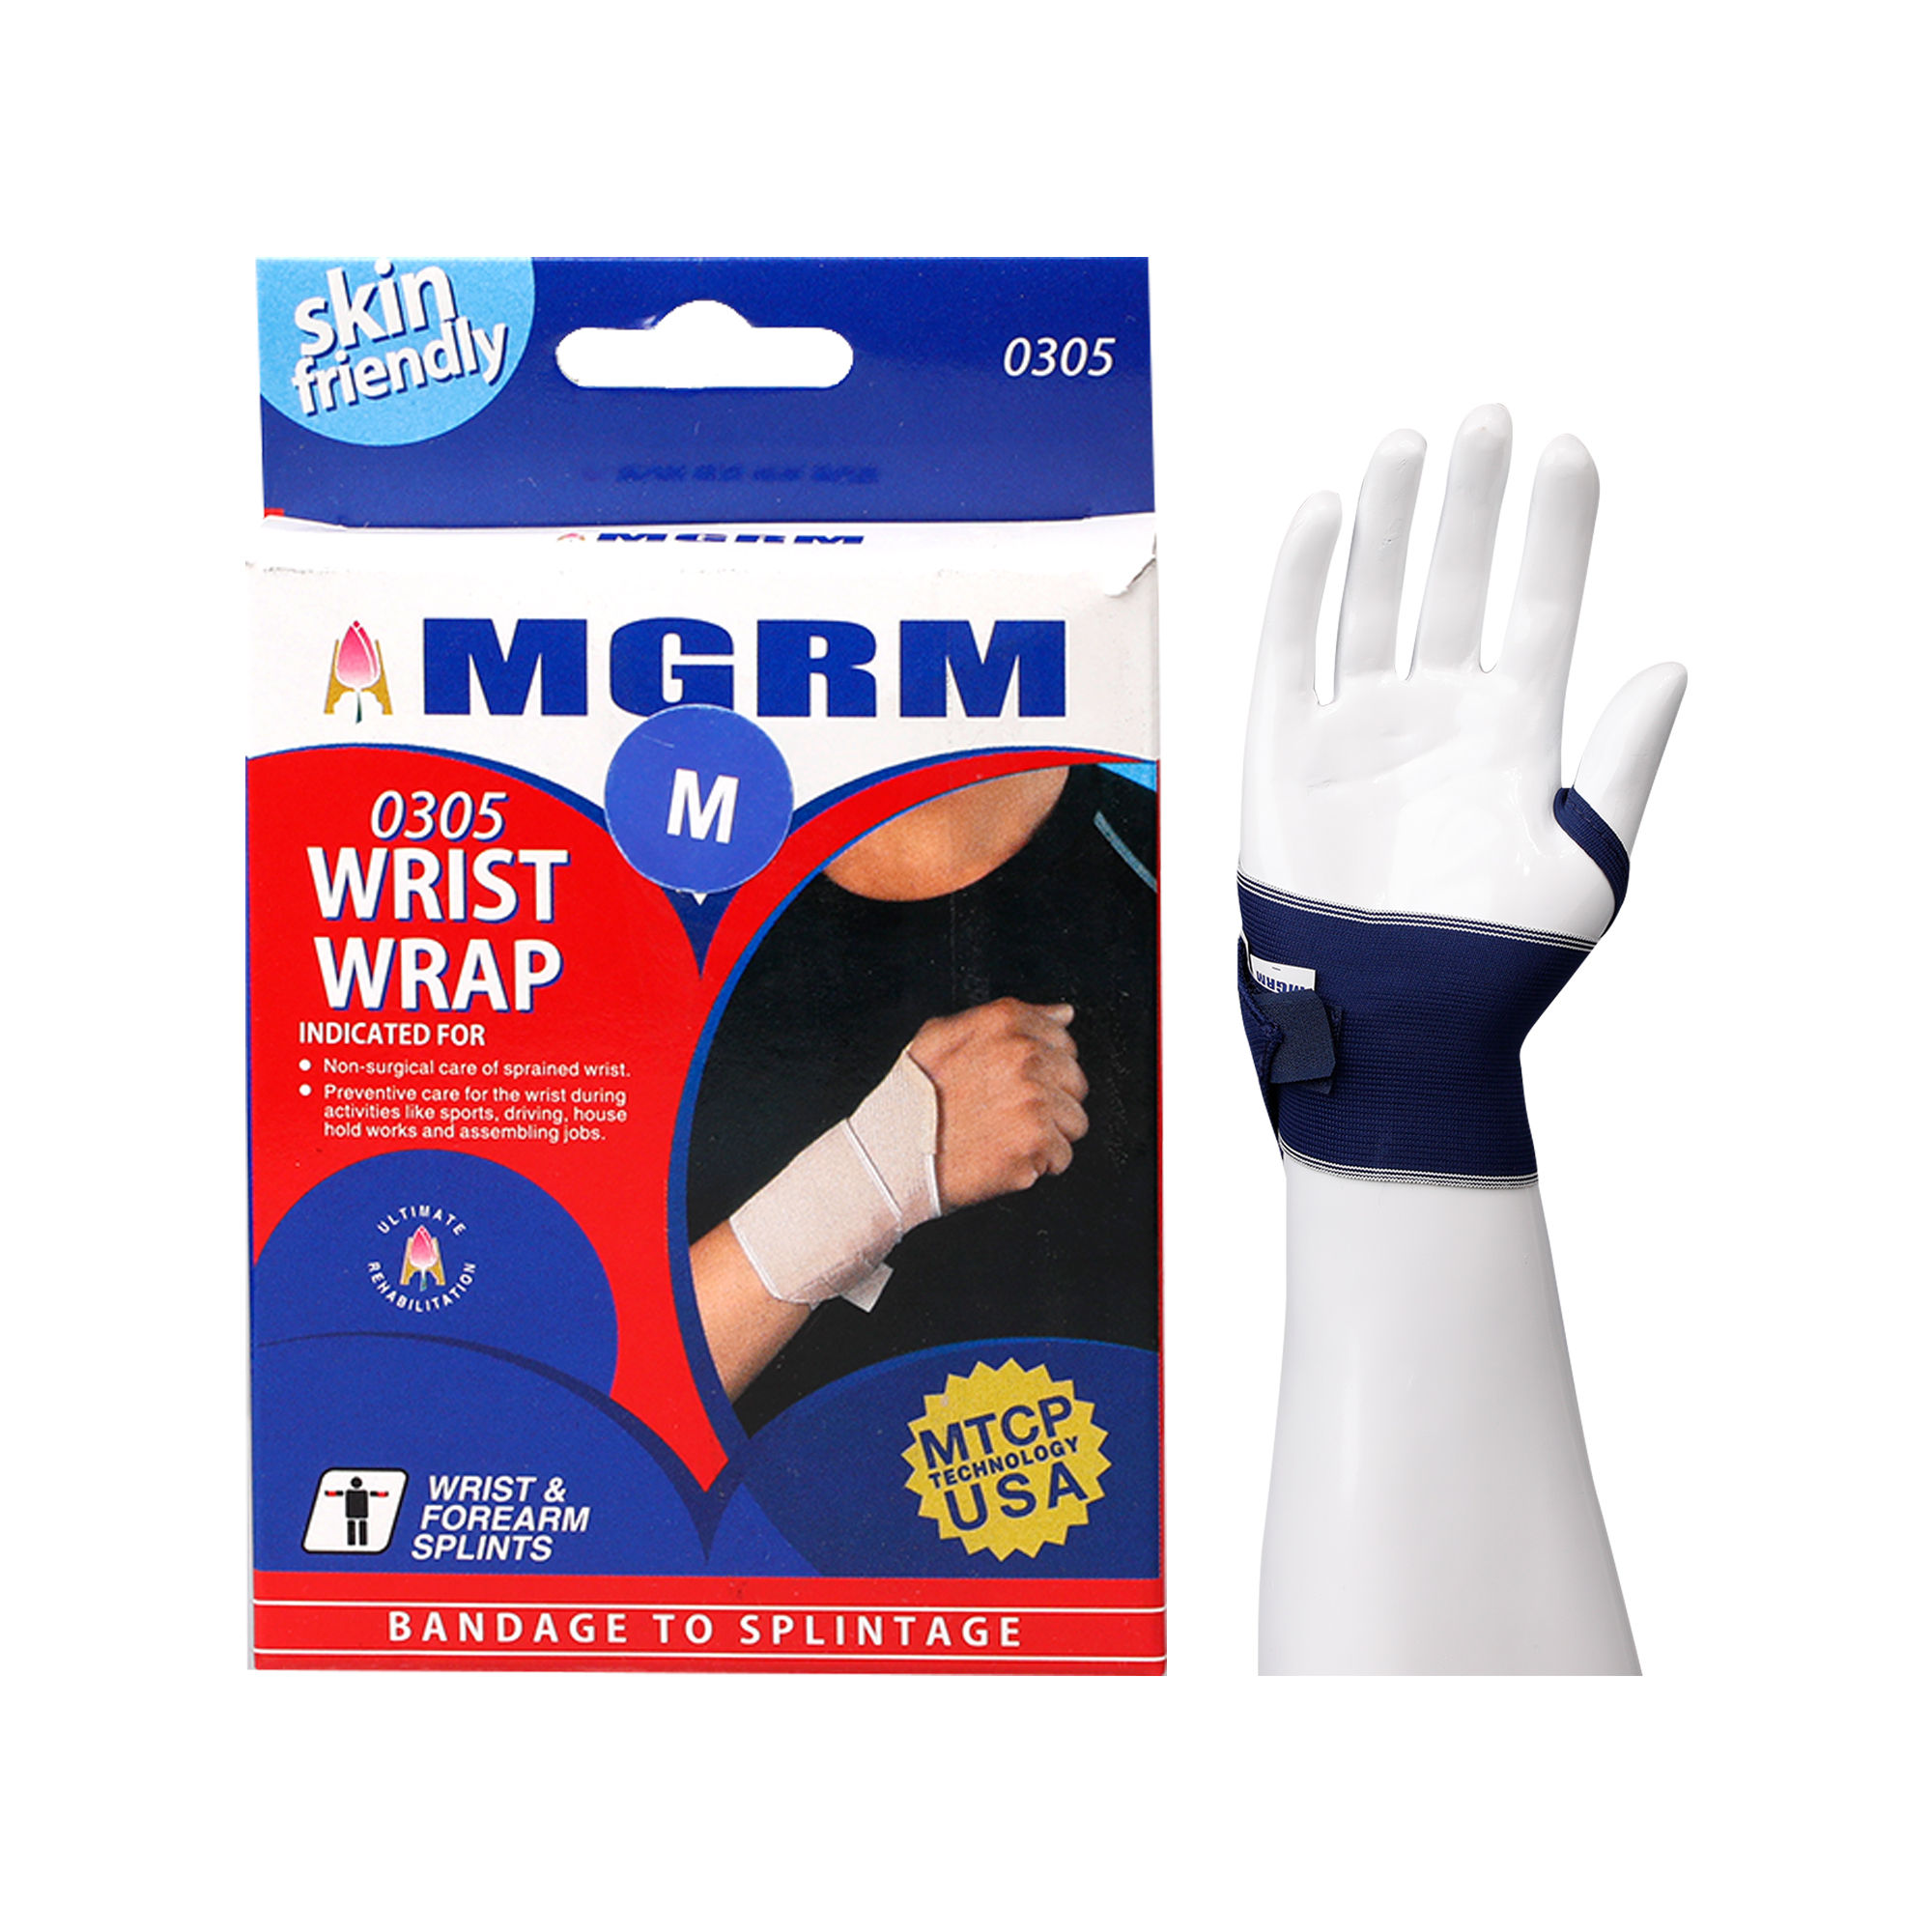 Mgrm Wrist Wrap 0305 Large, 1 Count, Pack of 1 